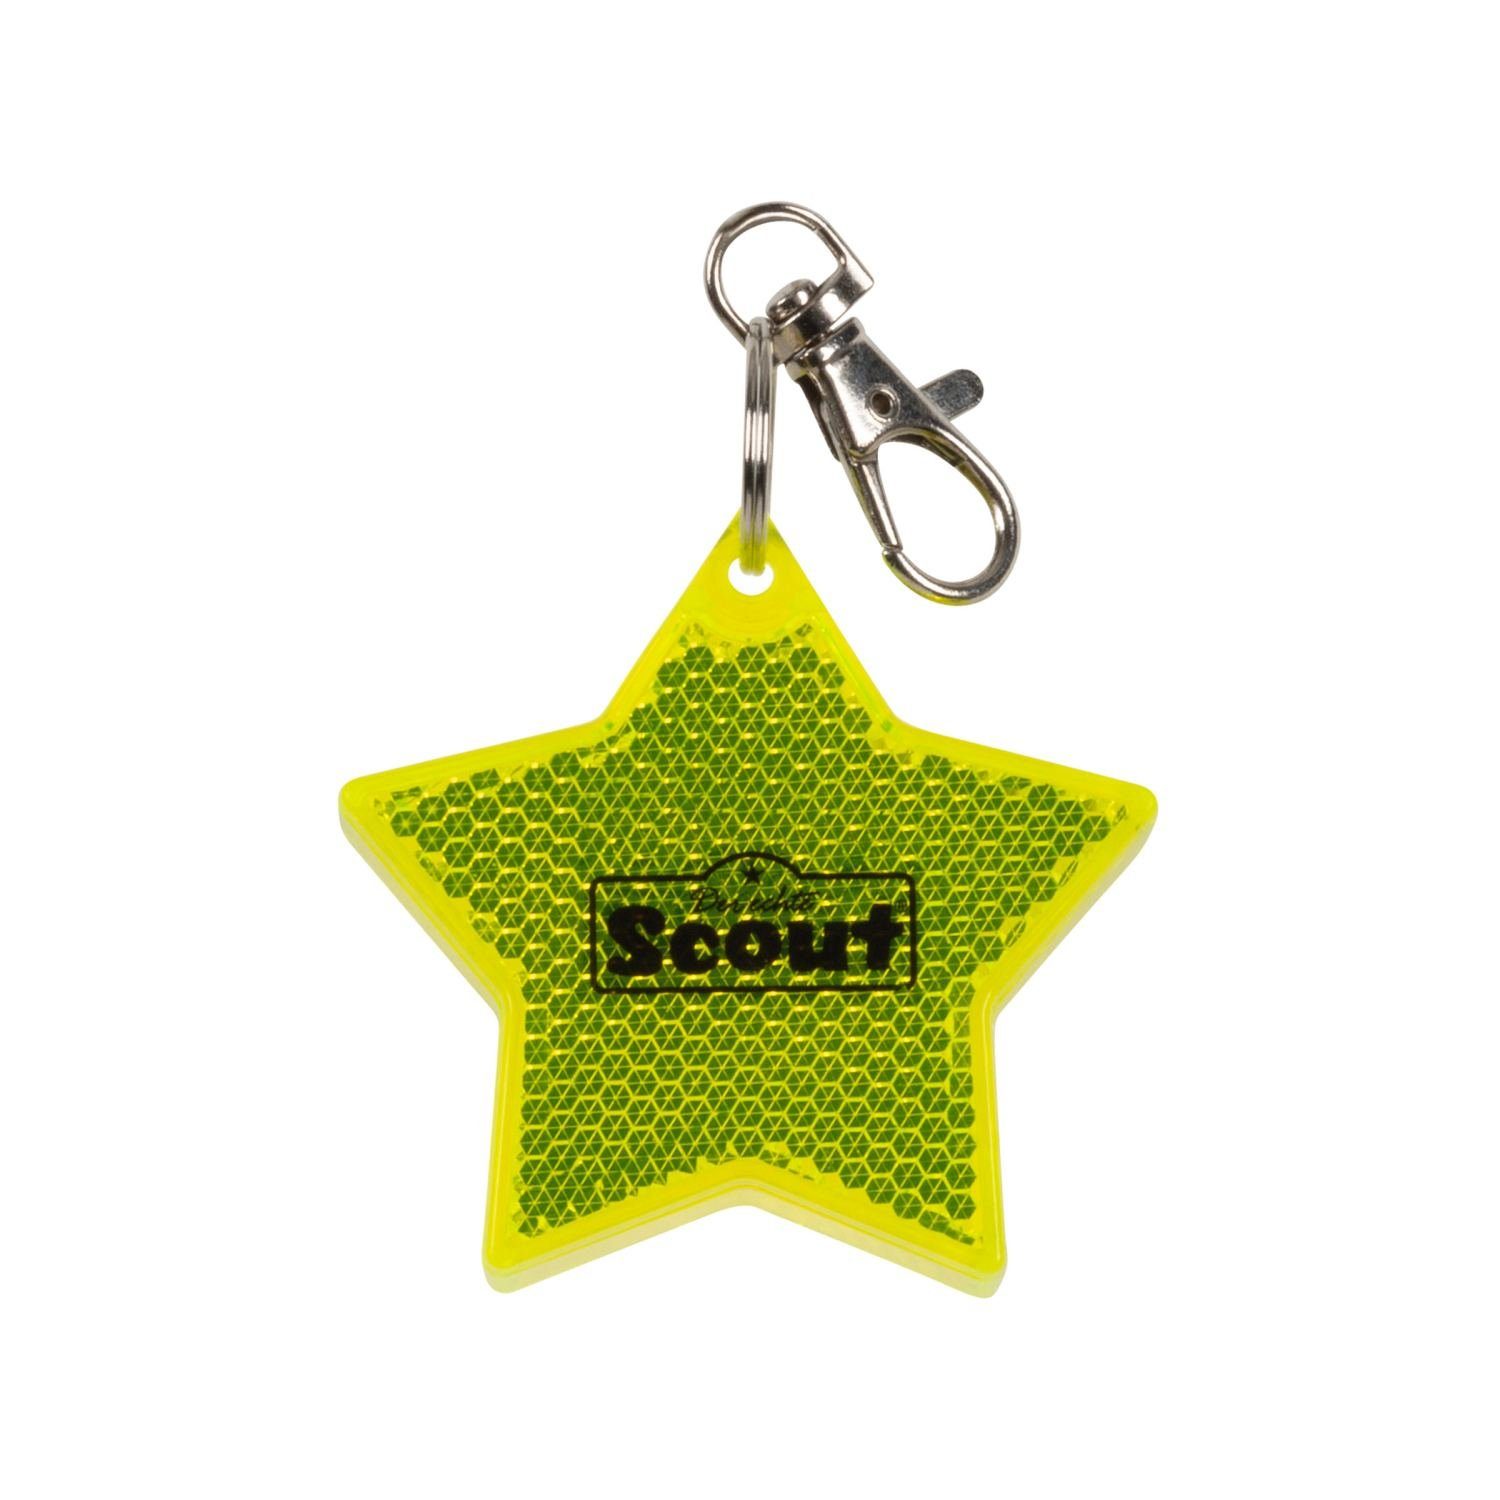 Scout Scout Blinky Babystiefel Yellow Star